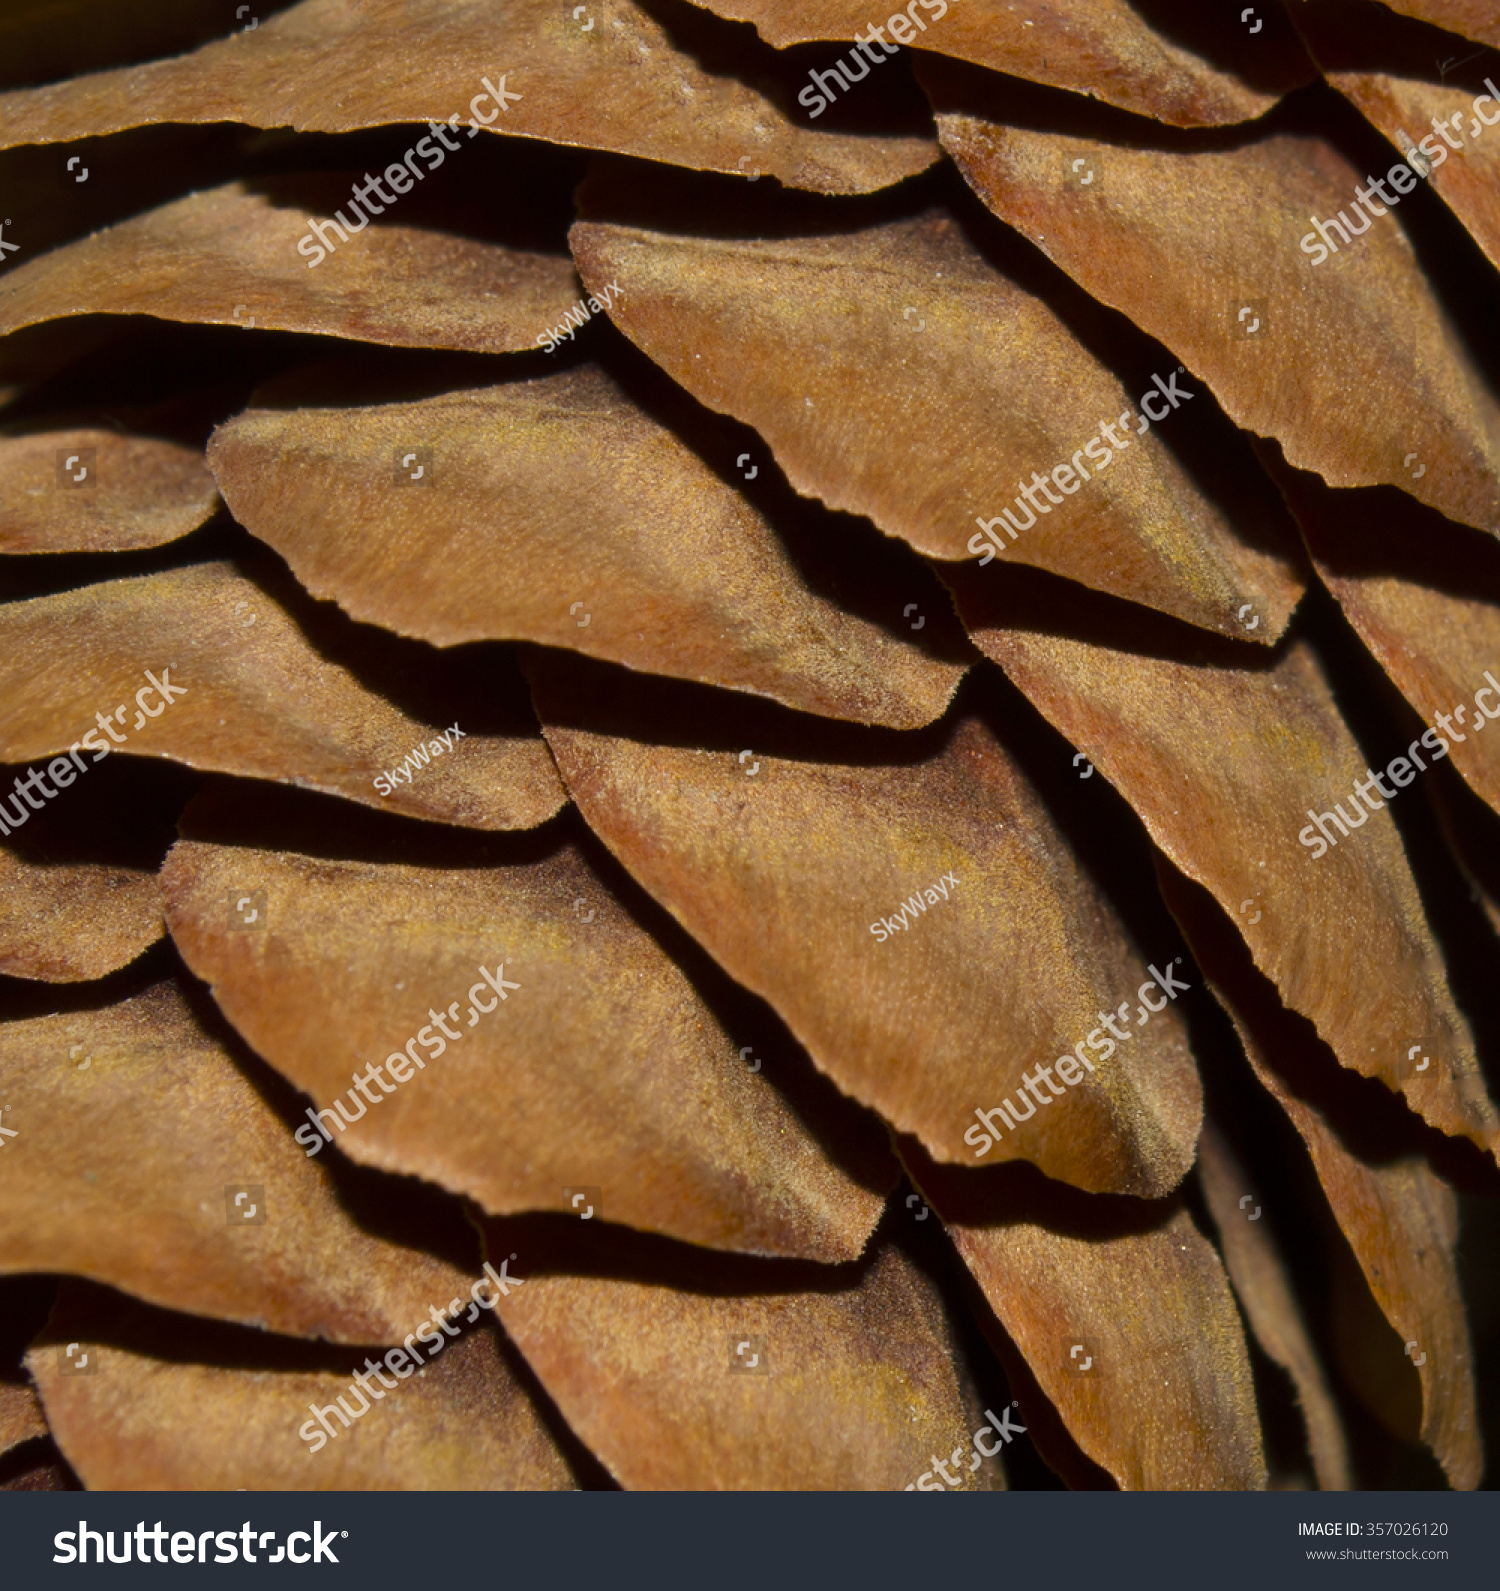 Brown pinecone close-up photo